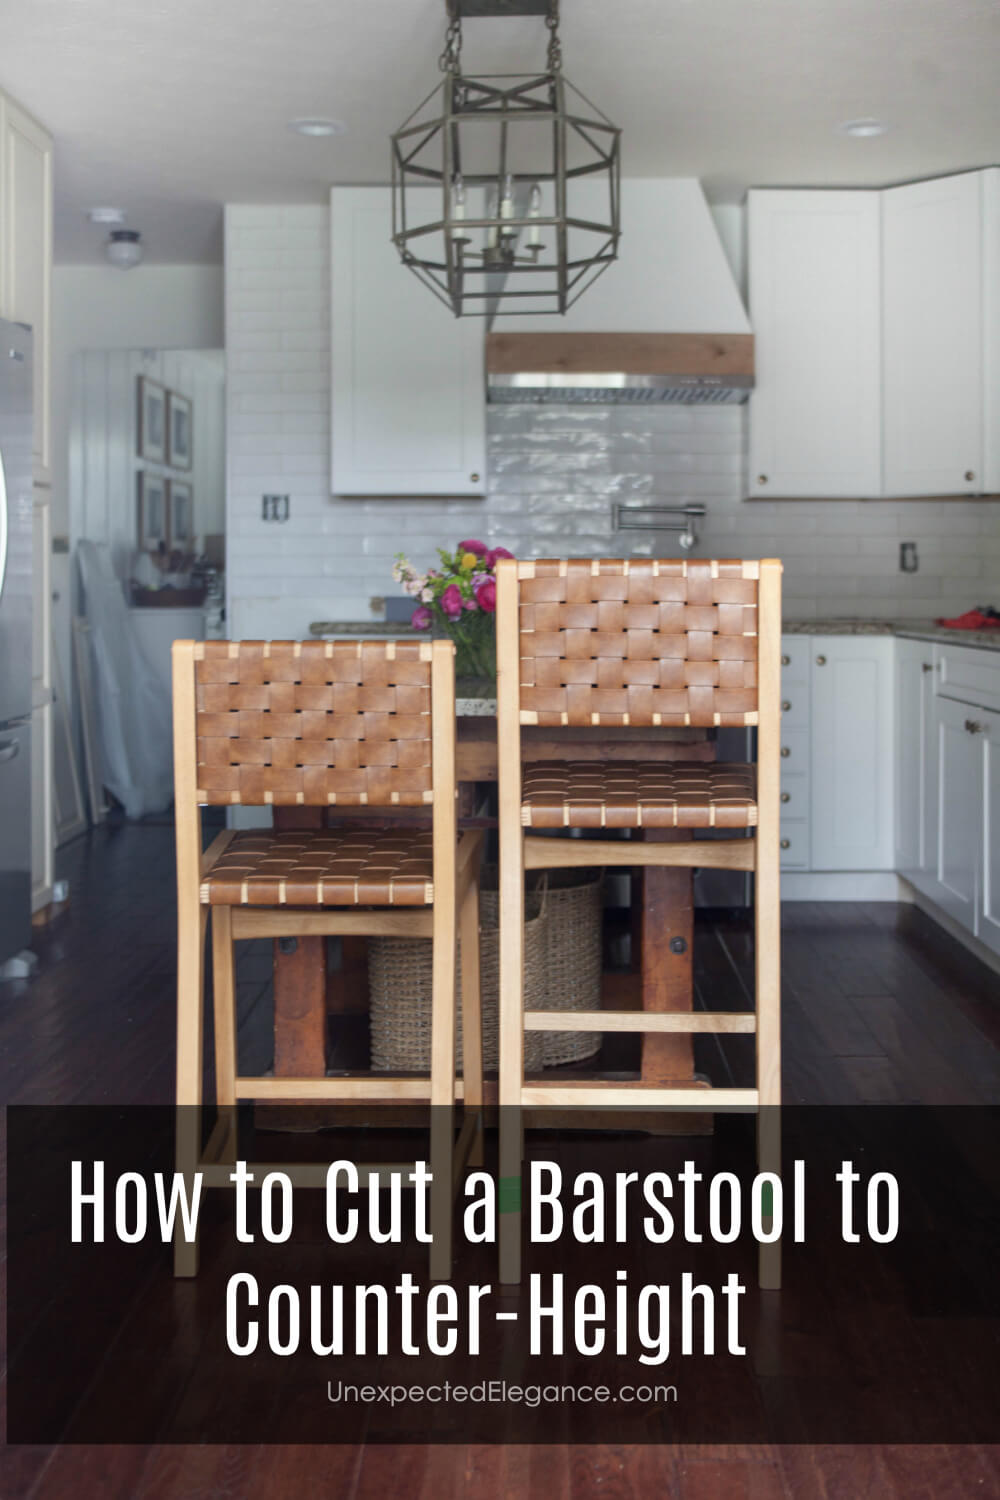 How To Cut A Barstool Counter Height, Best Way To Cut Stool Legs